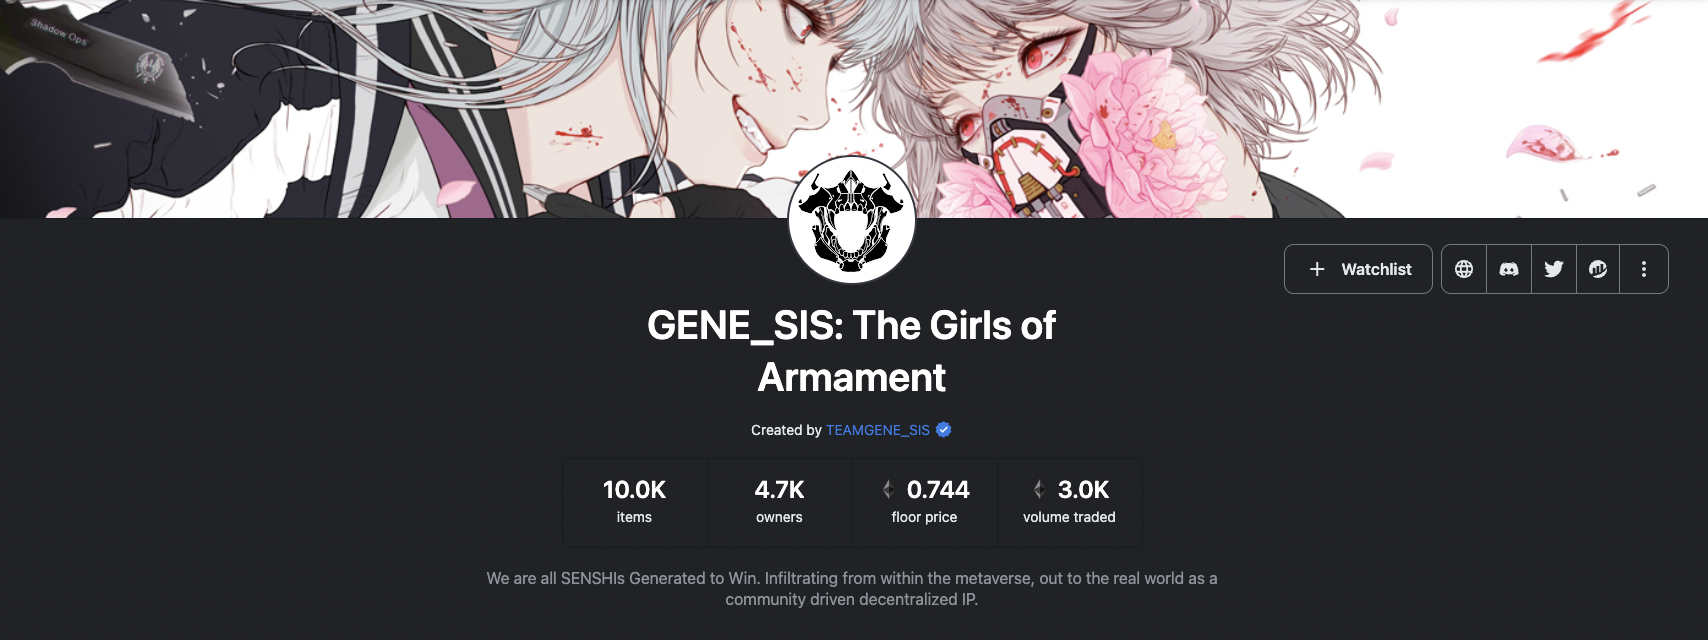 https://opensea.io/collection/gene-sis-the-girls-of-armament